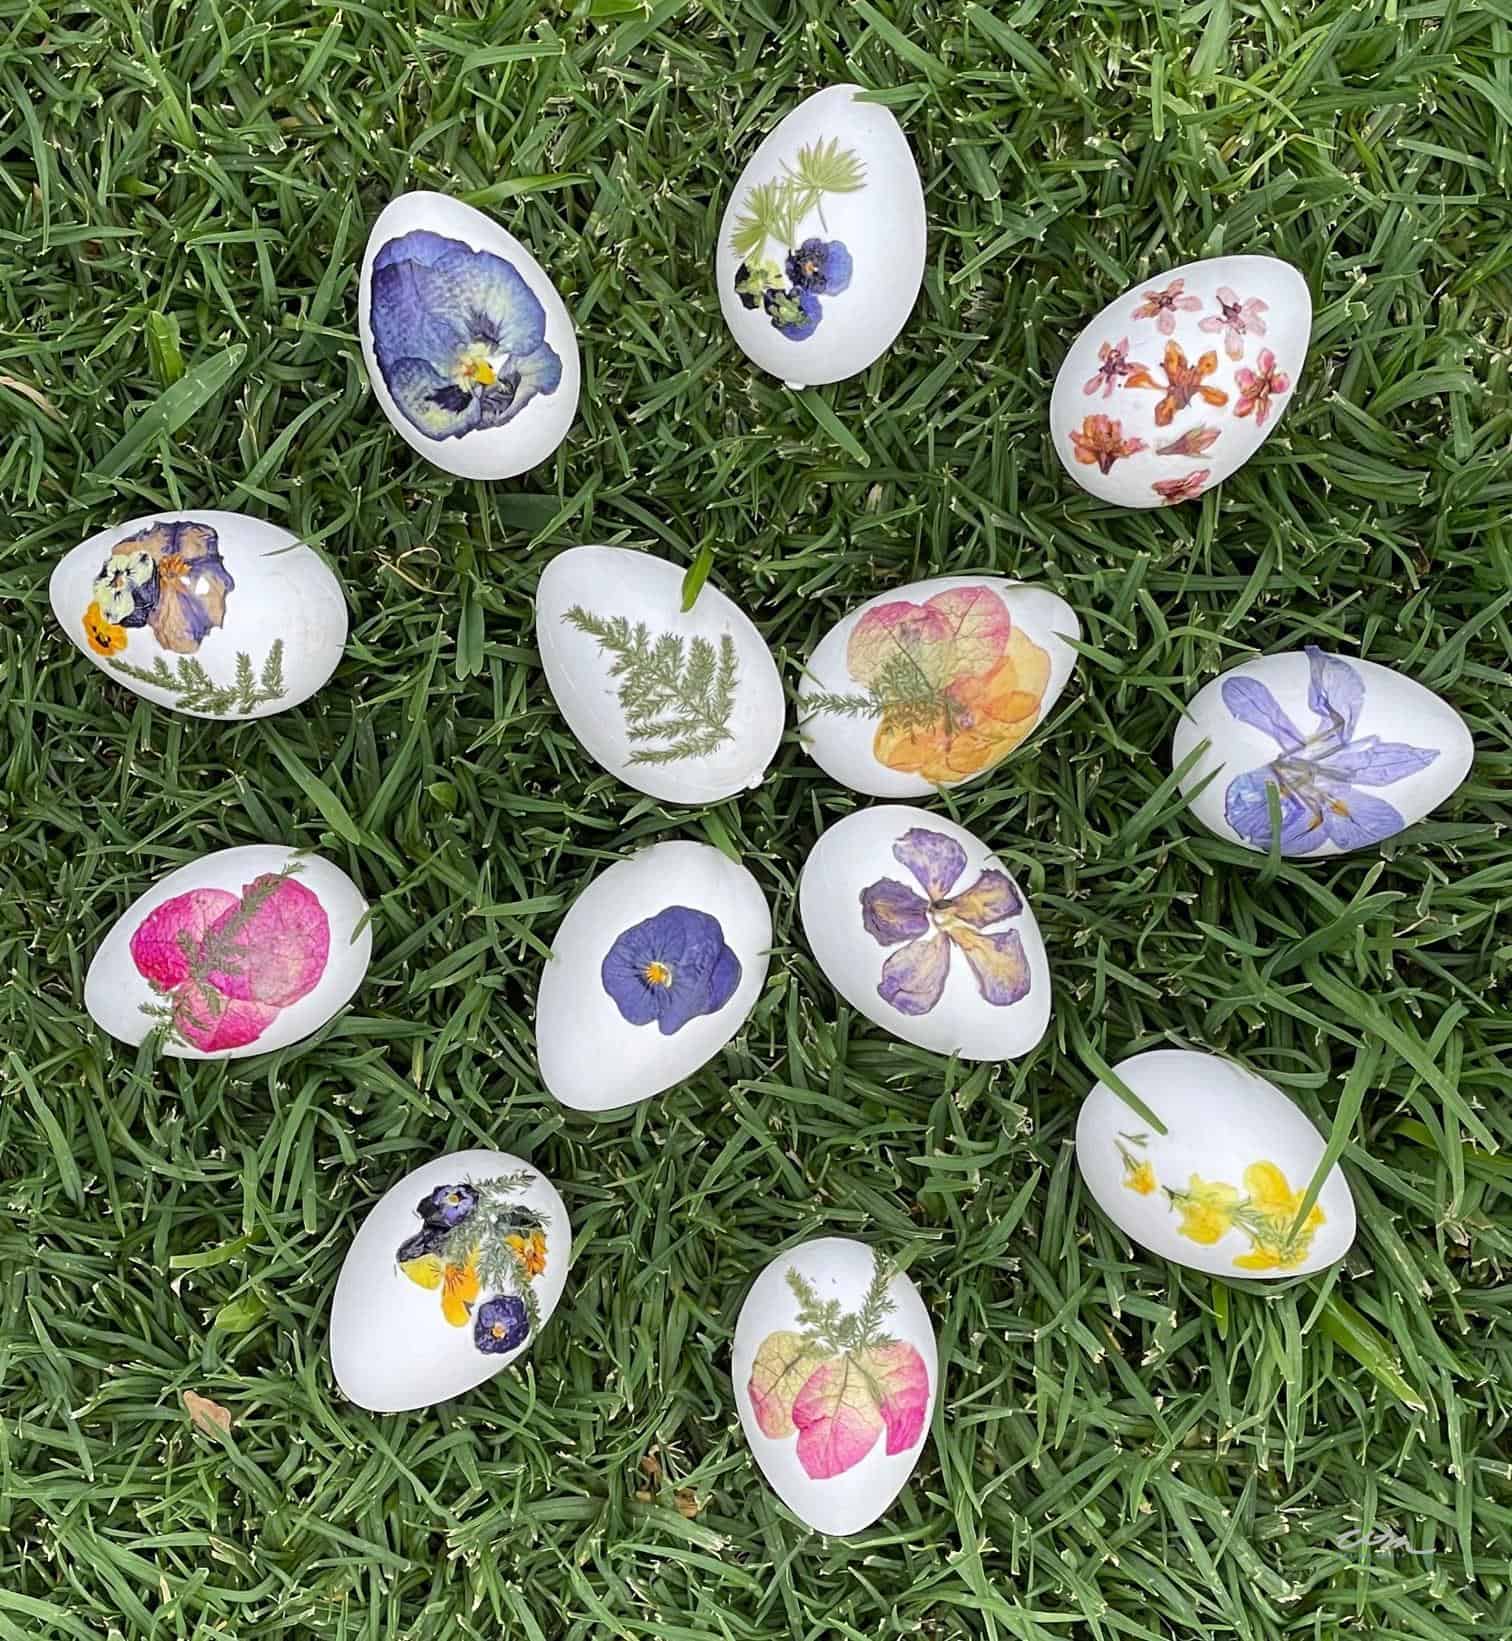 Dried Flower Easter Egg Decorating Ideas